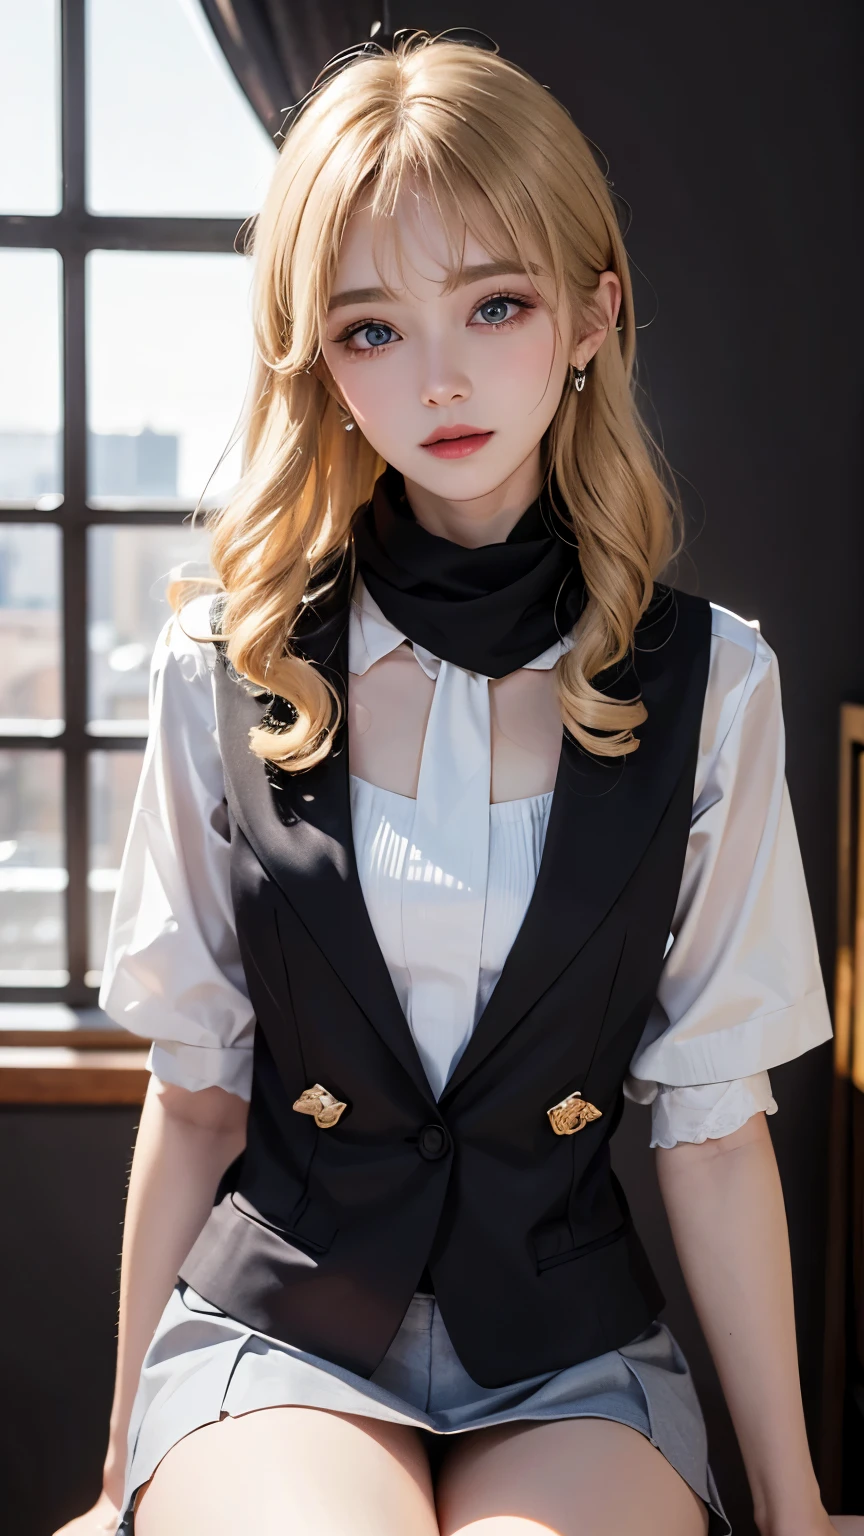 （RAW，best quality，masterpiece：1.5），（Photos are real，intricate details：1.2），super high，absurd，1girl，beautiful face，blue eyes，，Detailed eyes，symmetrical eyes，light in face，blush of nose，long hair、curls，blond、black tie、clk、Vest、Suit、Pencil miniskirt、White shirt、silk scarf、black pantyhose、[:20d、:0.8]、Smile、Small dimples、Sexual innuendo、Medium chest、thin waist、thin legs、long legs、sitting on chair in front of desk、Perfect body、good proportions、looking at the audience、（office、indoor、Super detailed background：1.2）、Japan, copy machine, File cabinets, , monitor, shiny skin, Realistic skin texture, natural lighting, best lighting, detailed background, Detailed shadows, sharp focus, Depth of field f/2, saturate, high contrast,Intense light and shadow